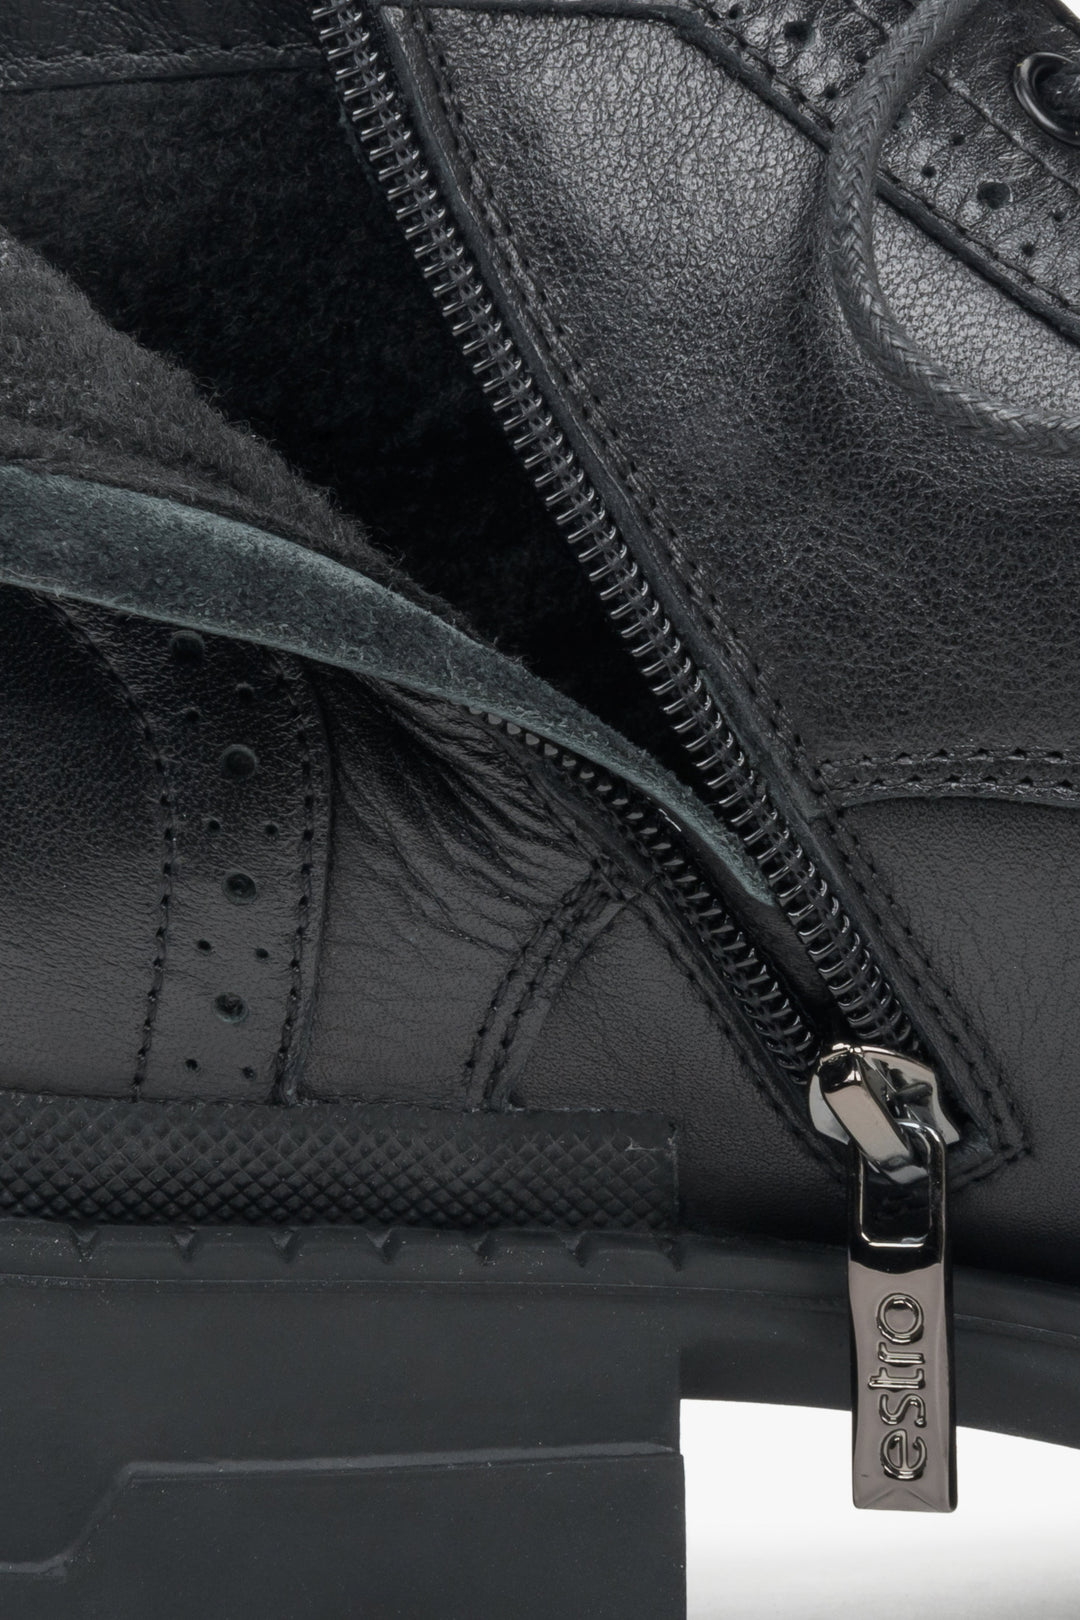 Estro men's winter boots made from black genuine leather - close-up of the insulation.